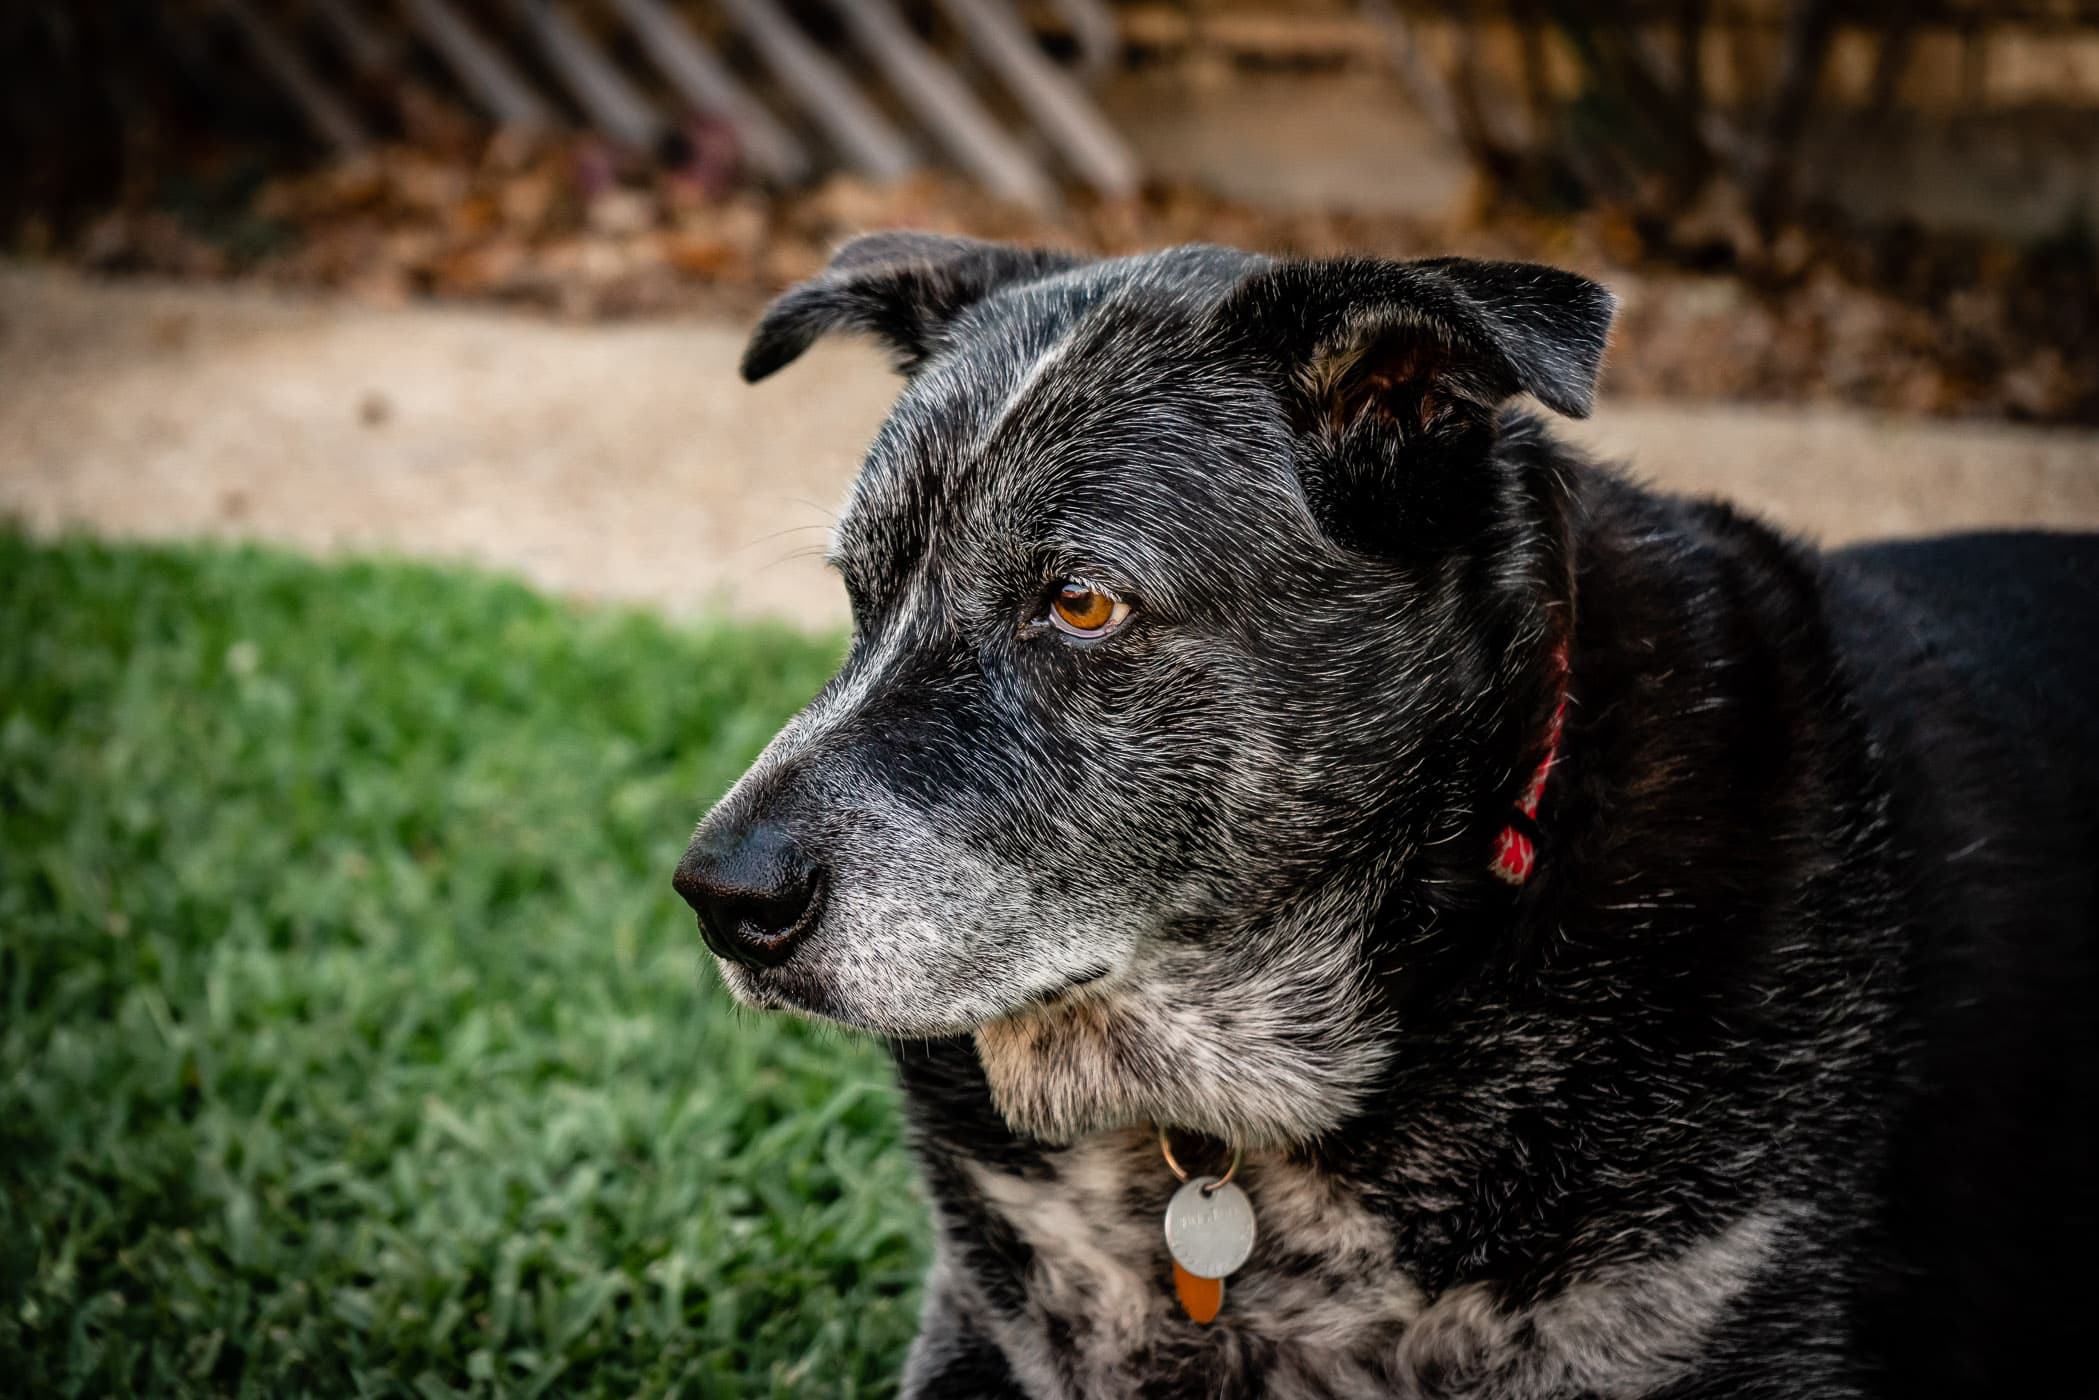 Our beloved dog, Winston, relaxes in the yard on a Spring day. Yesterday, we had to say goodbye to him after almost 10 years of love and companionship. I've written more about our life with Winston here.